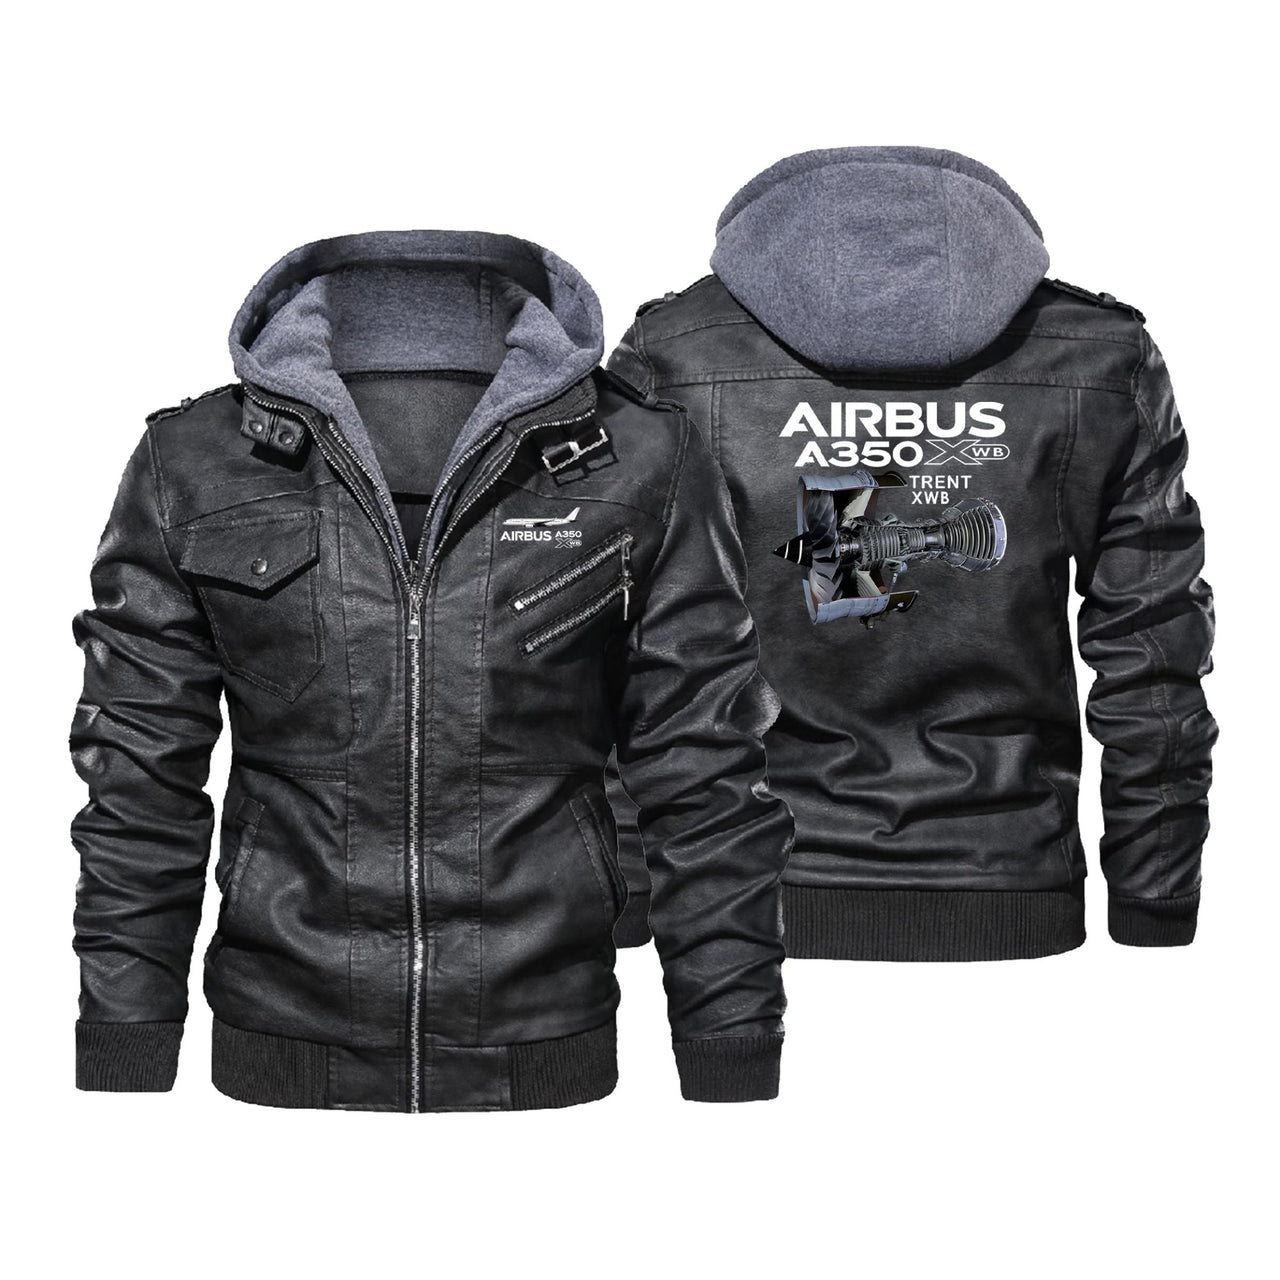 Airbus A350 & Trent XWB Engine Designed Hooded Leather Jackets